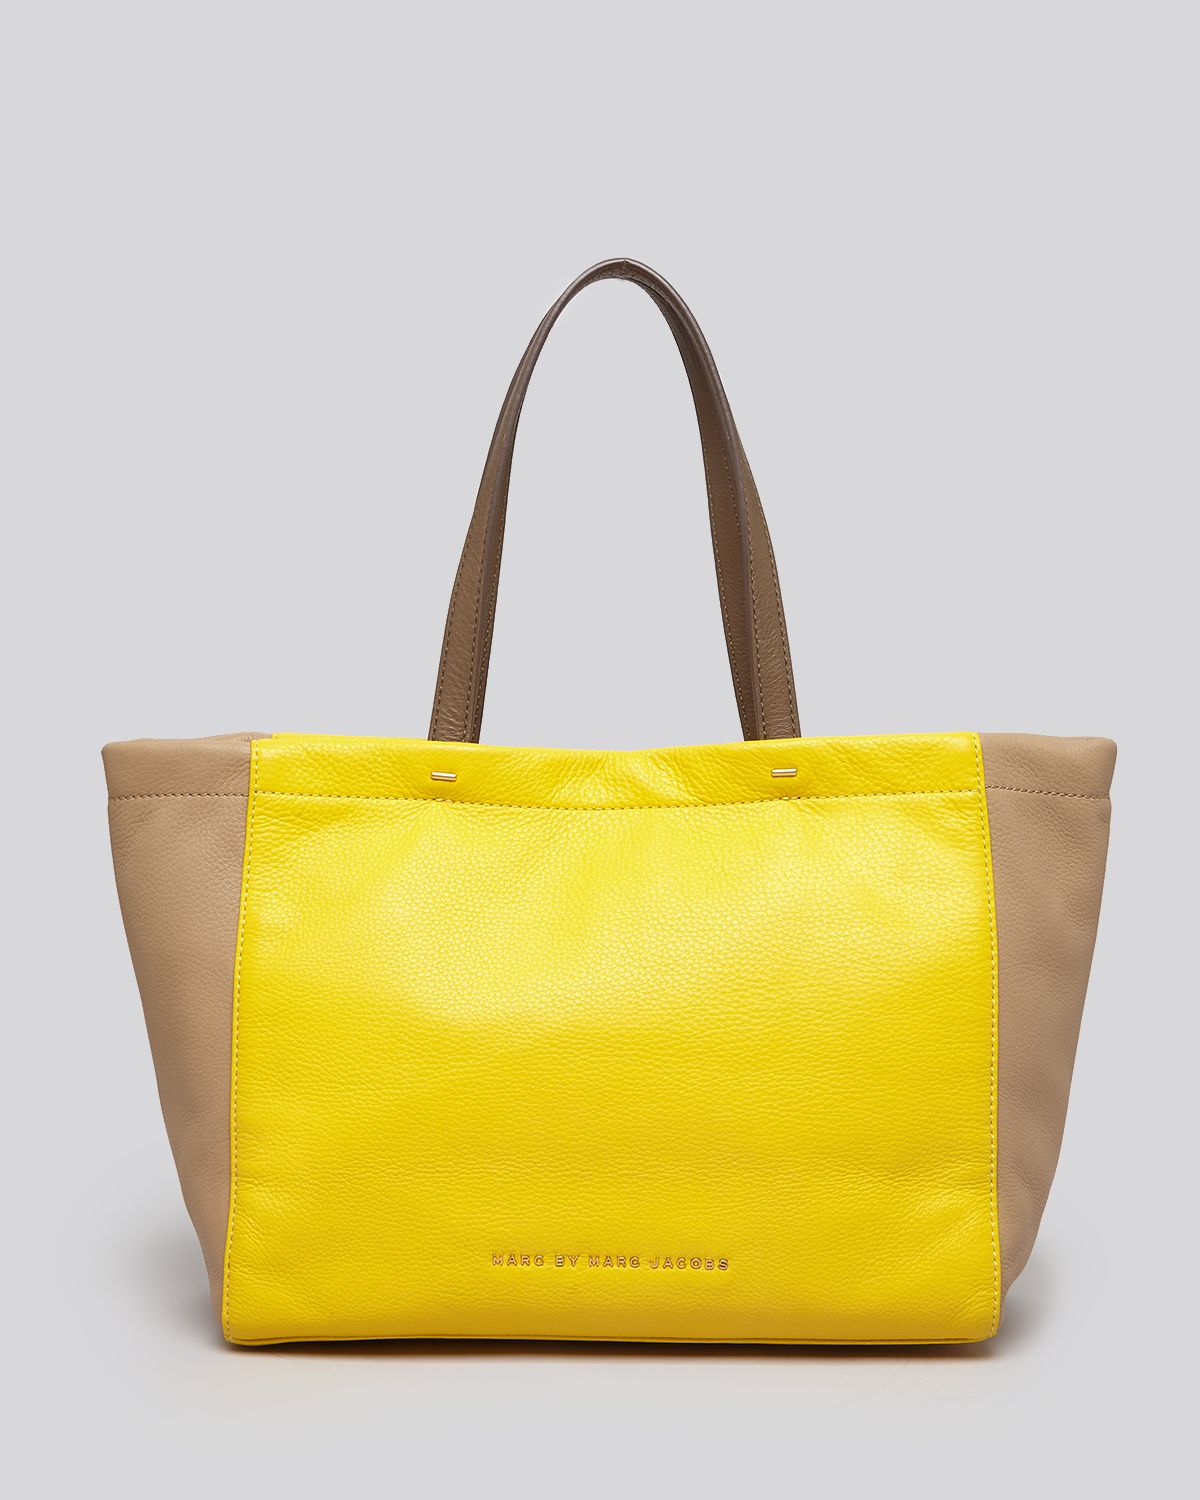 Lyst - Marc By Marc Jacobs Tote Whats The T in Yellow